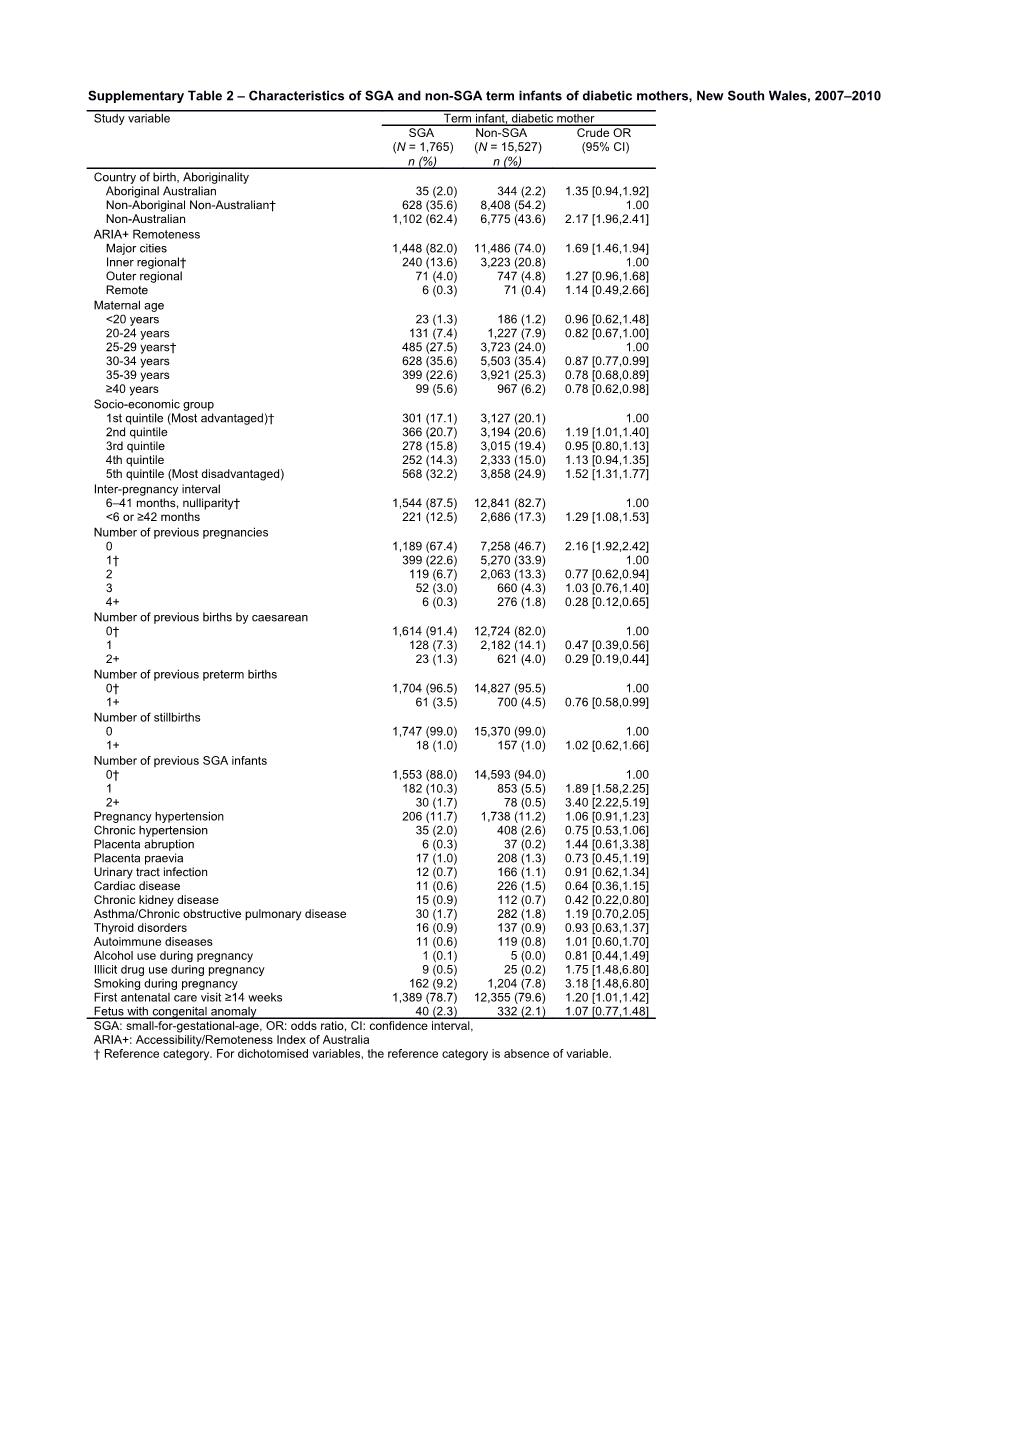 Supplementary Table 2 Characteristics of SGA and Non-SGA Term Infants of Diabetic Mothers